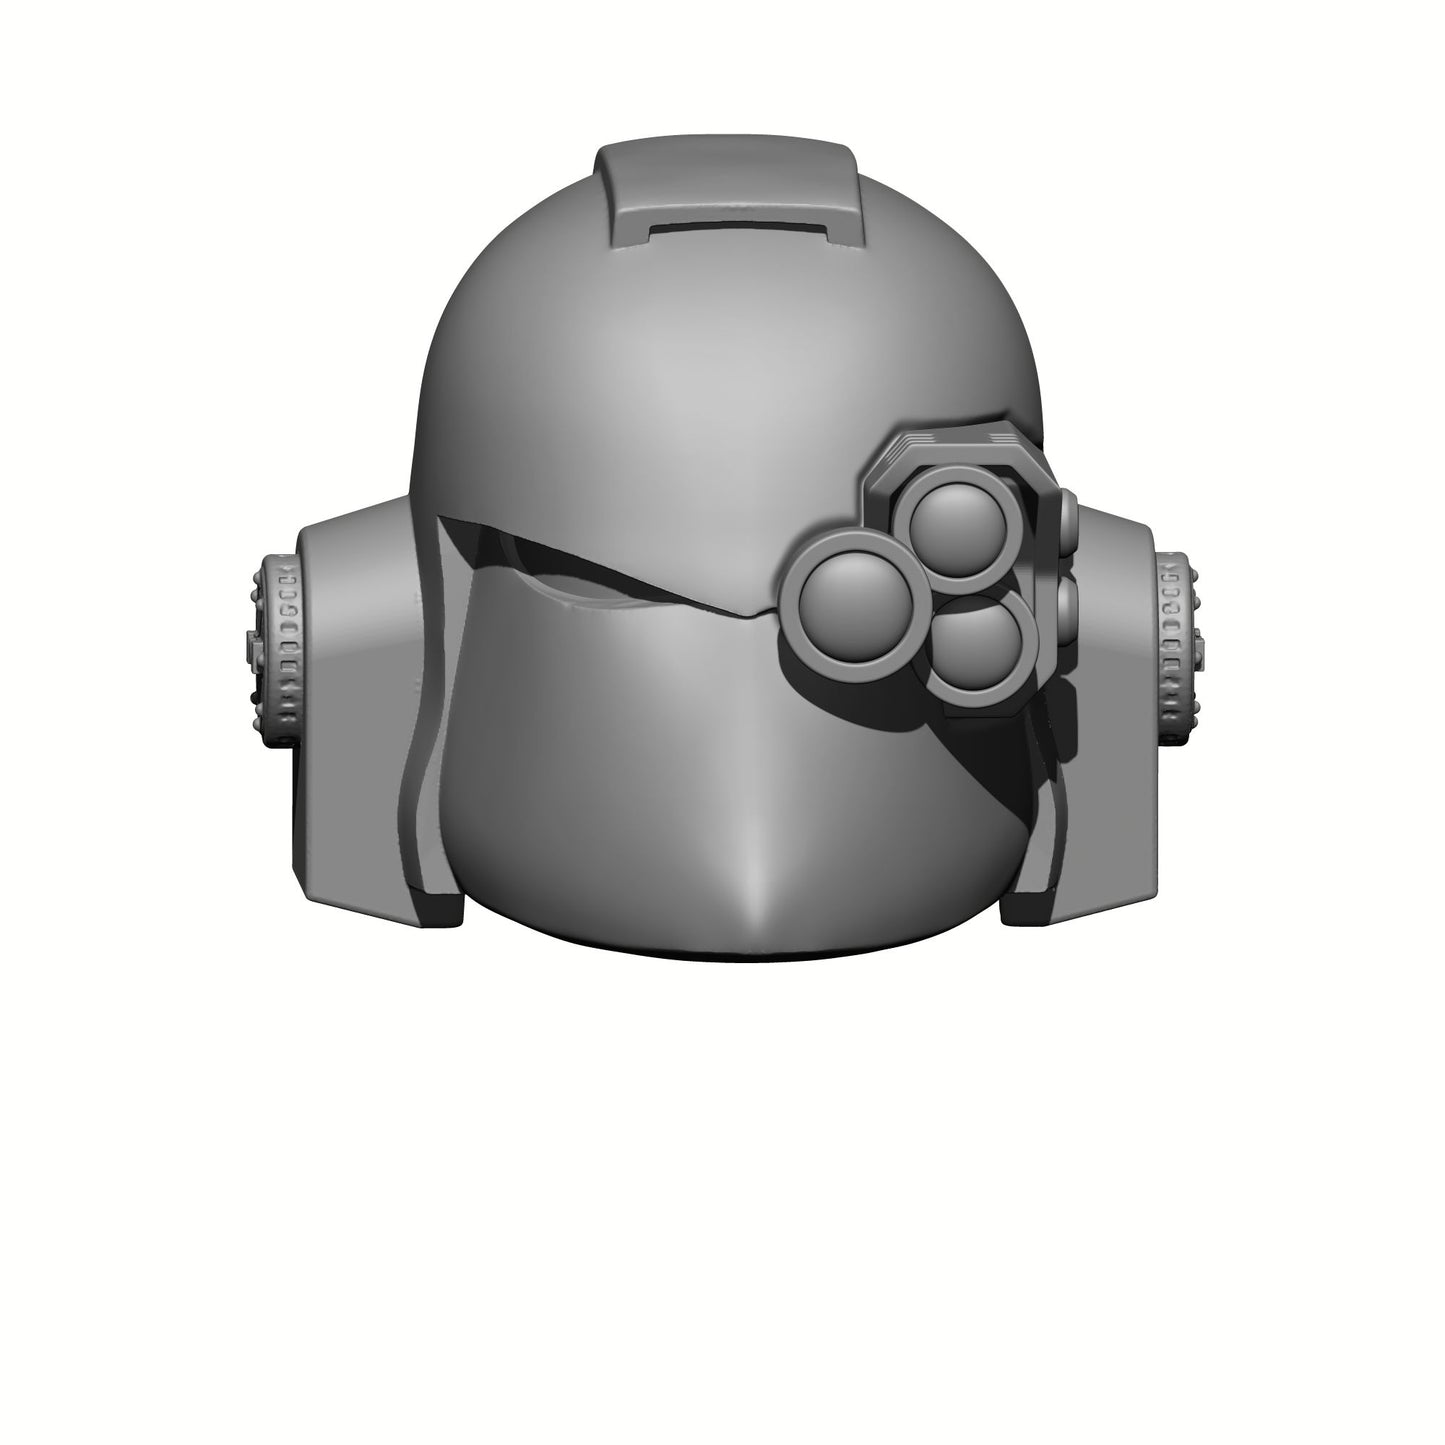 Techmarine Mark VI Helmet with Optics Compatible with McFarlane Toys Space Marine Action Figures by Fantasy World Games